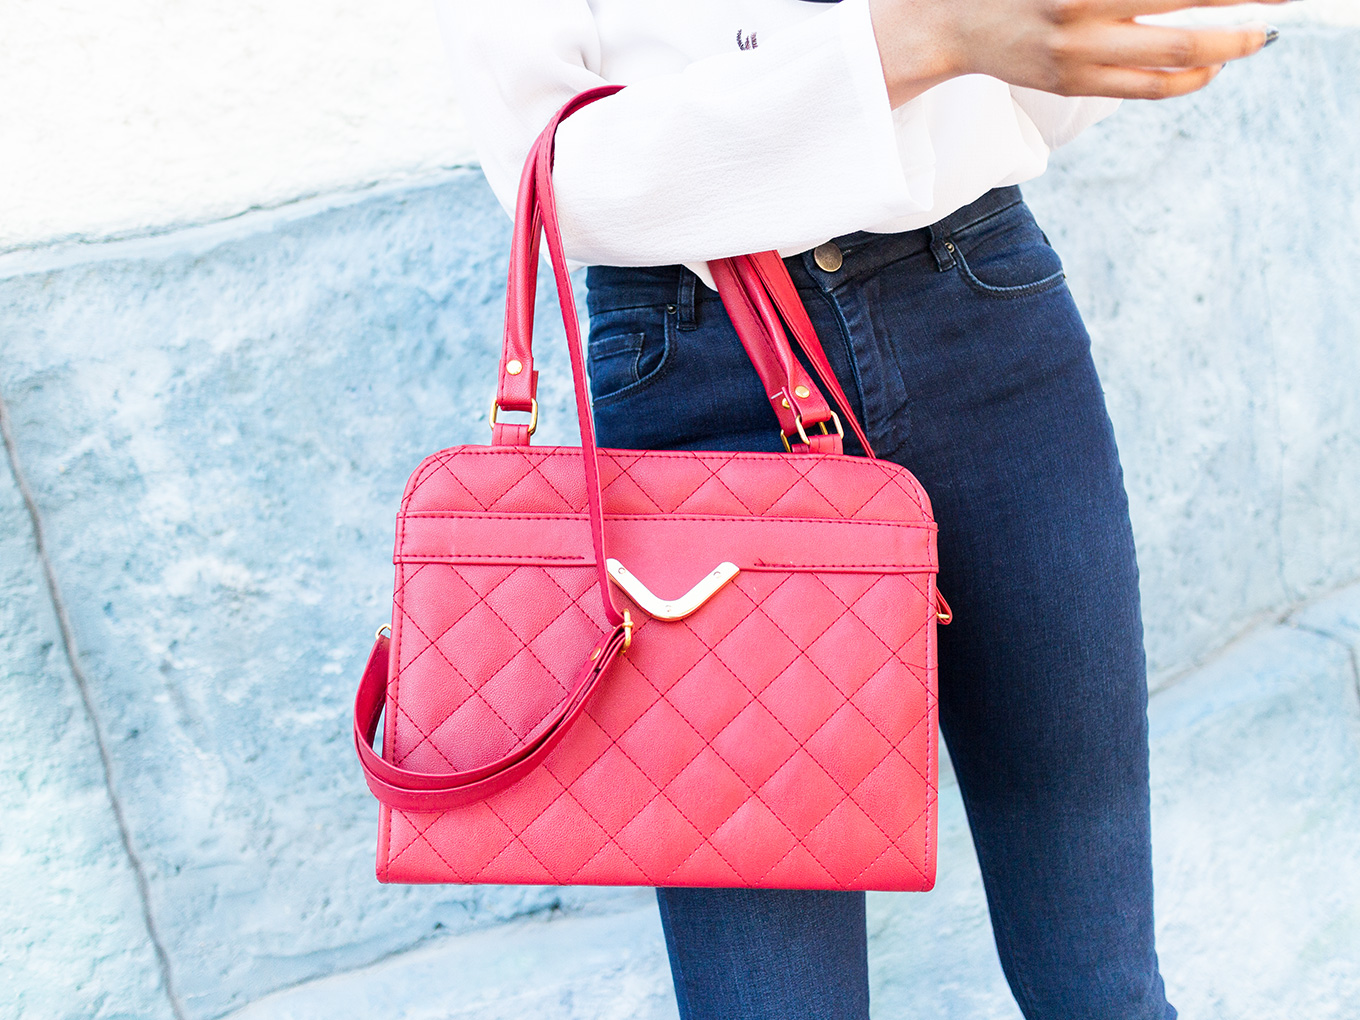 Pairing a red bag wearing a casual outfit